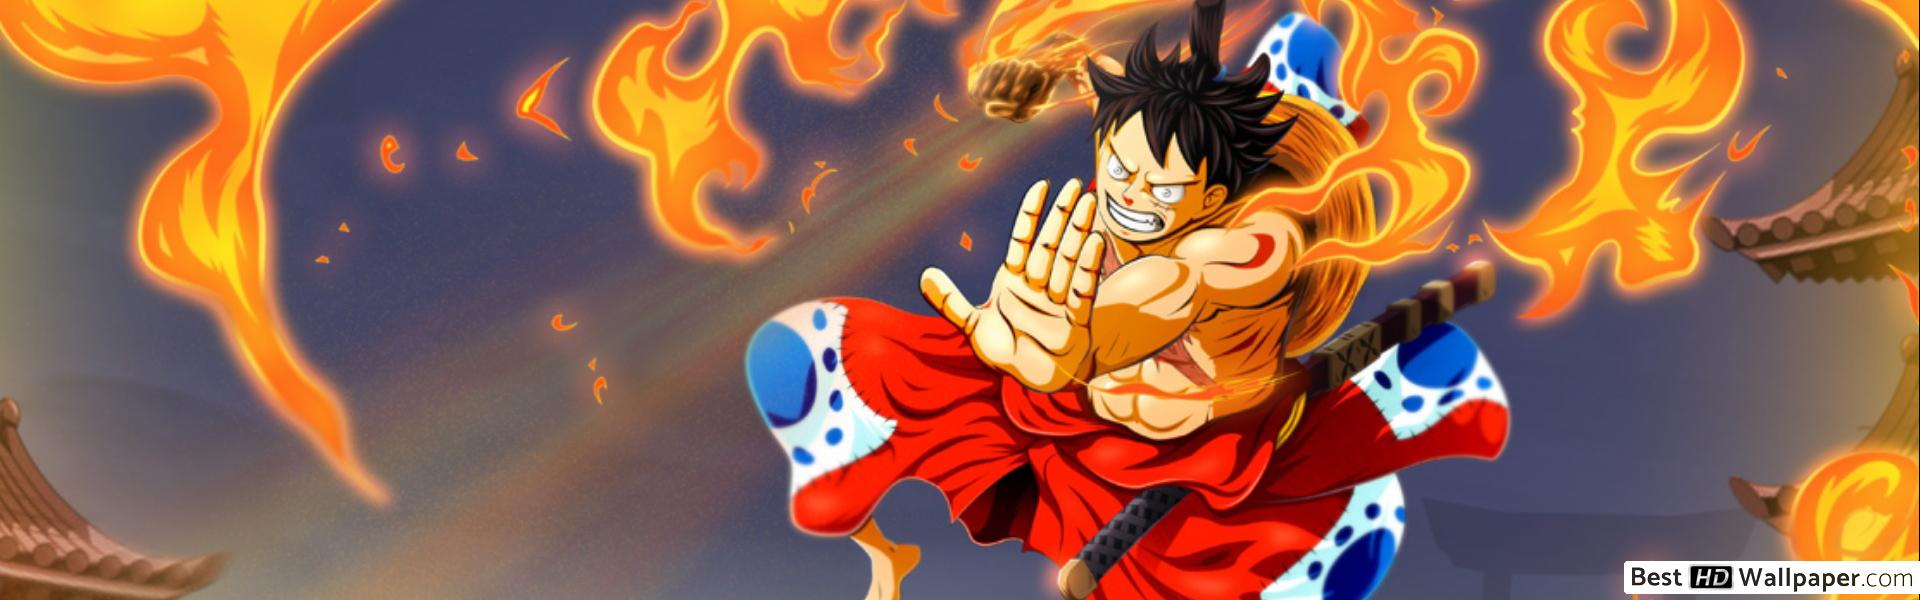 One Piece Dual Monitor Wallpaper Free One Piece Dual